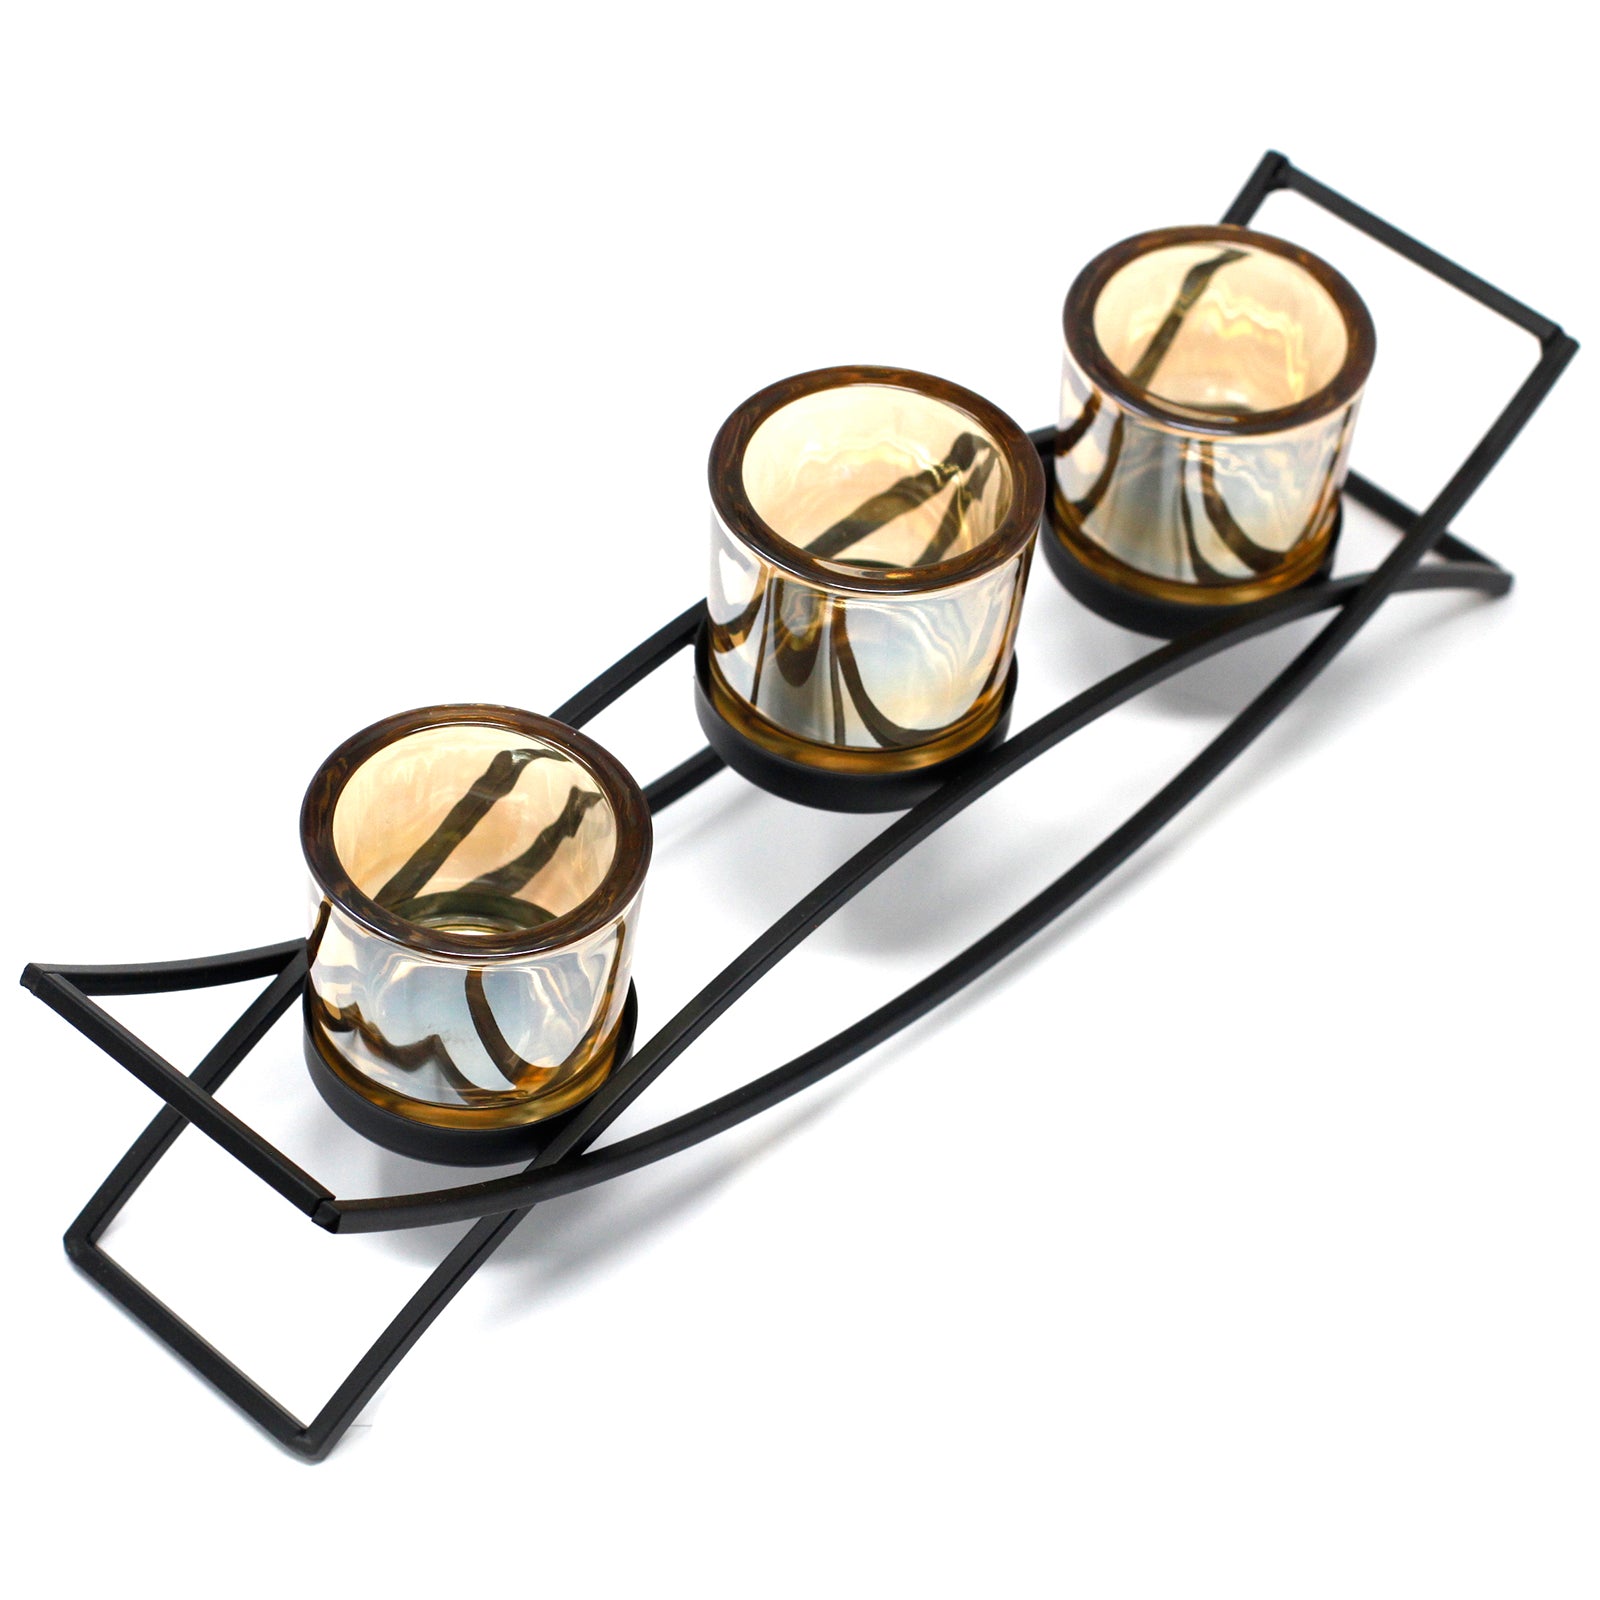 Iron Candle Holder - 3 Cup Silluethe